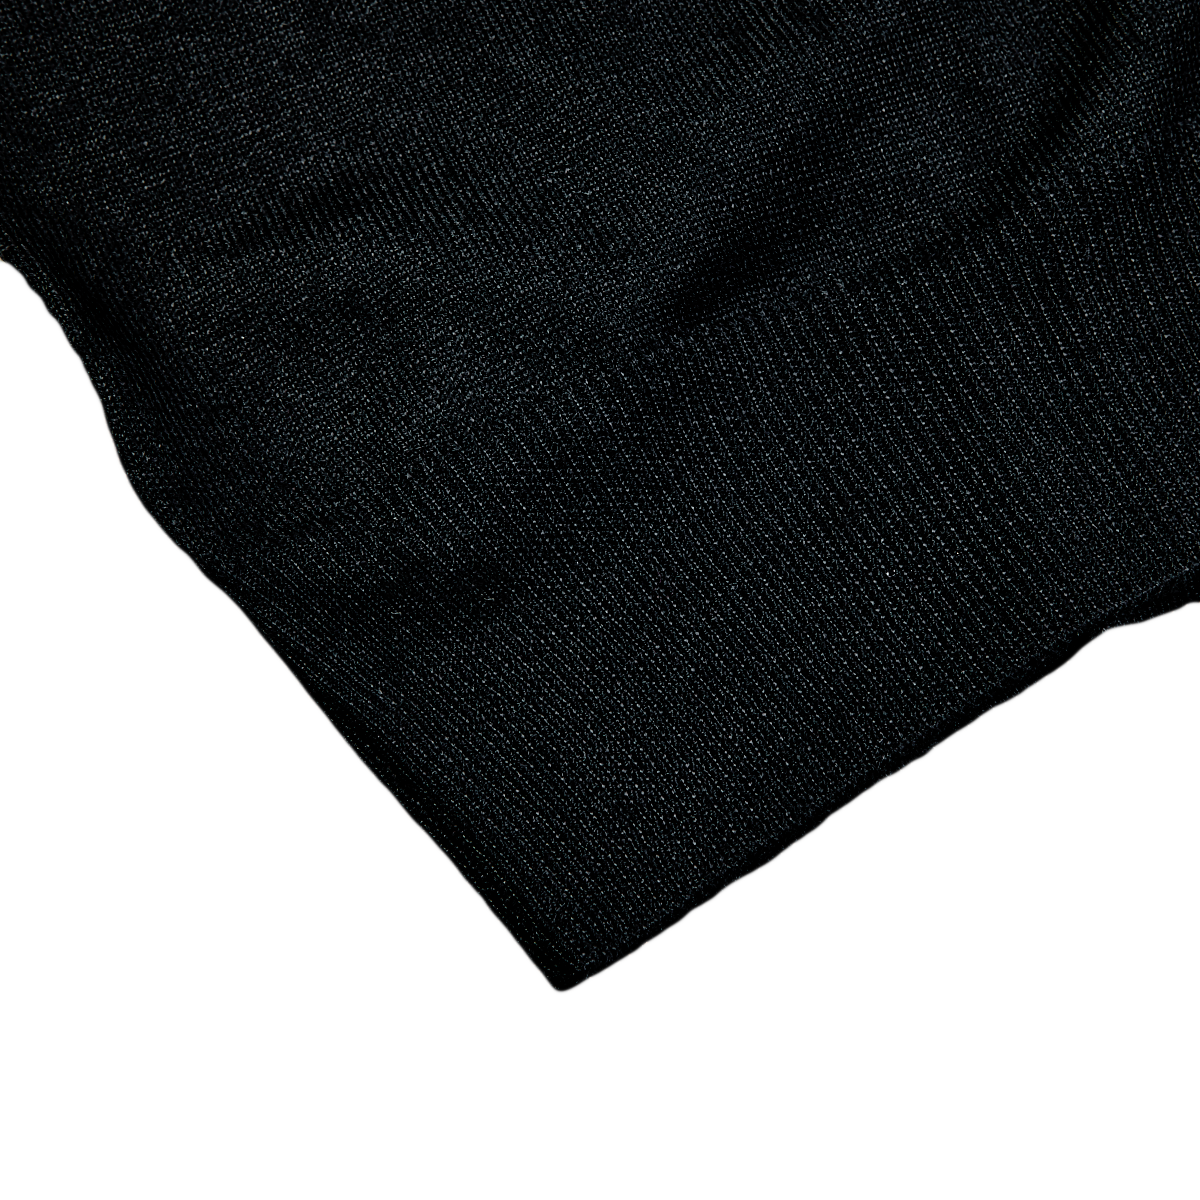 A close up of a Fedeli Black 140s Wool Mockneck Sweater on a white surface.